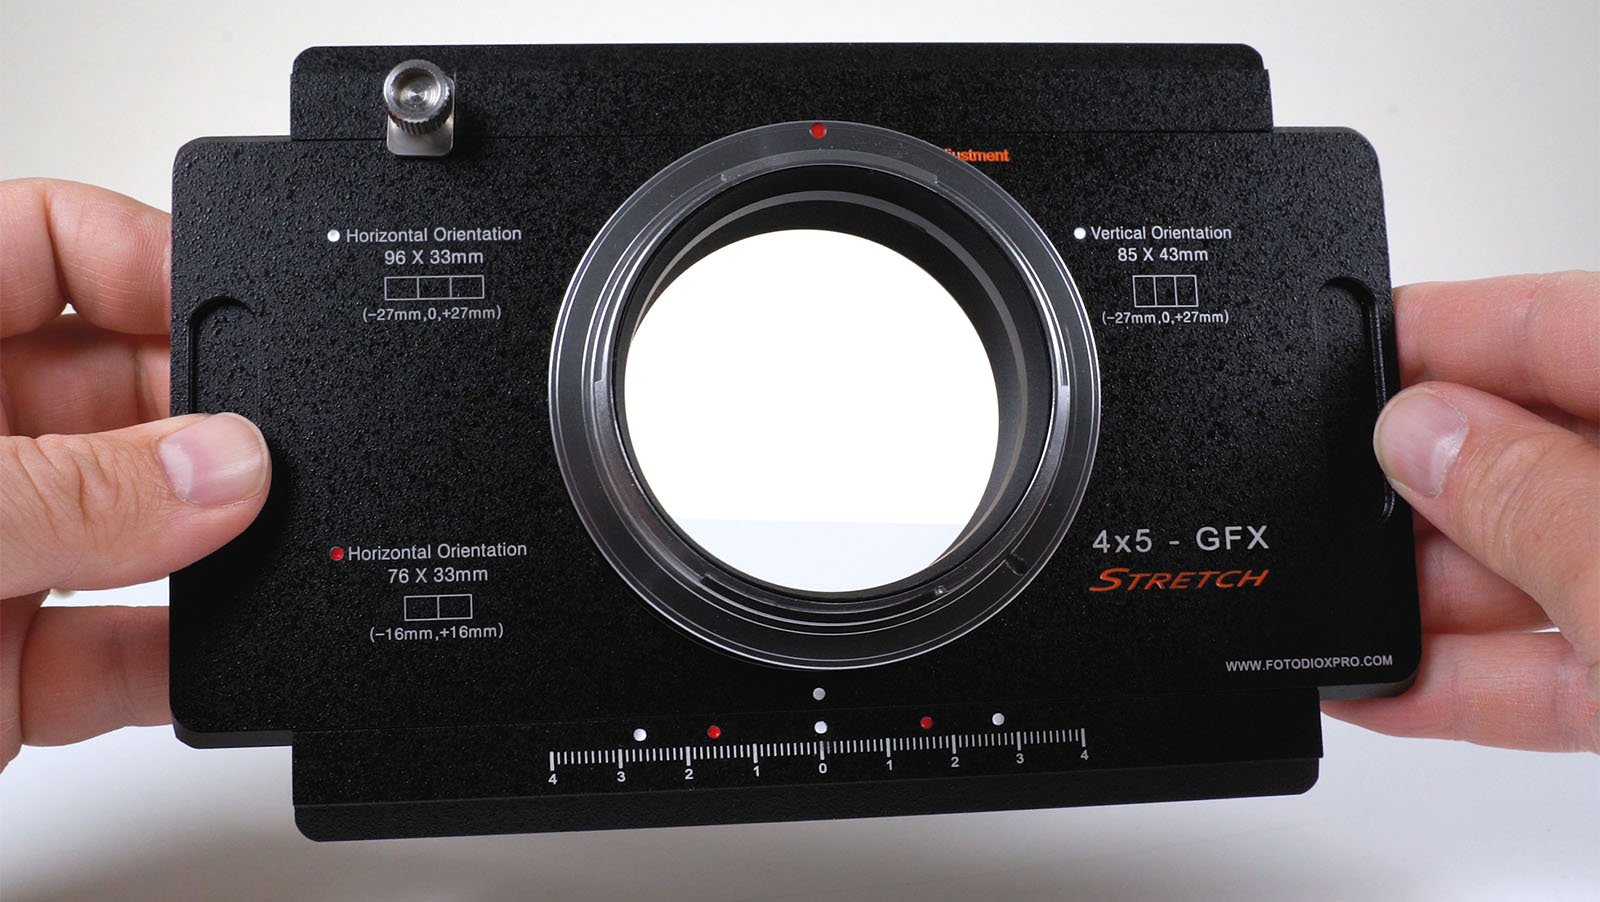 Two hands holding a fotodiox gfx stretch adapter, which enables the use of large format lenses on medium format cameras. the black adapter is displayed with measurement markings and orientation labels.